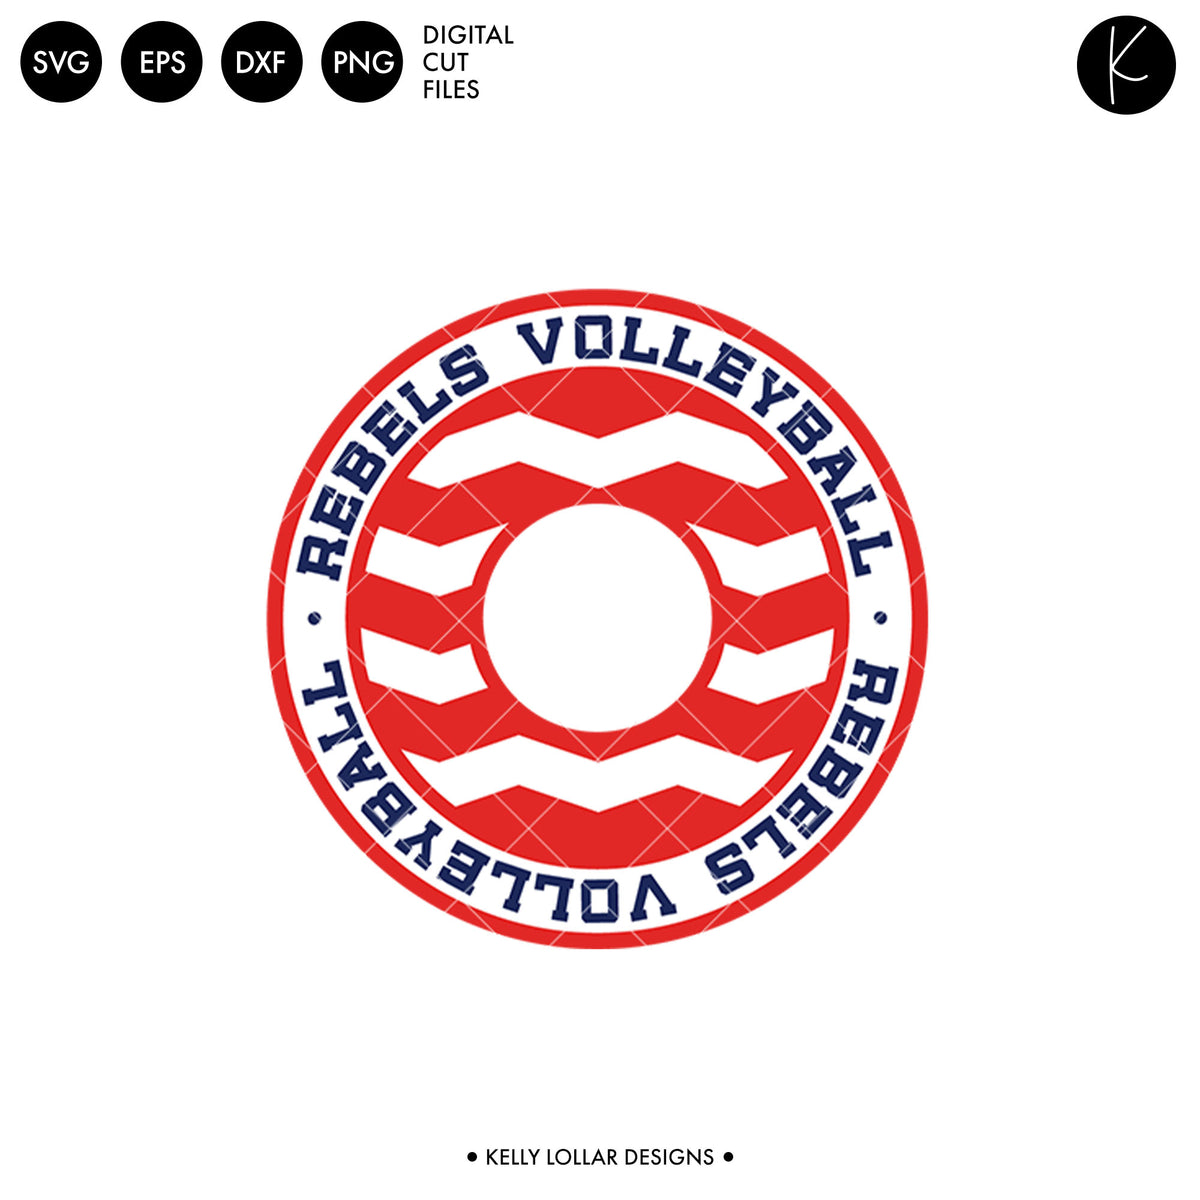 Rebels Volleyball Bundle | SVG DXF EPS PNG Cut Files